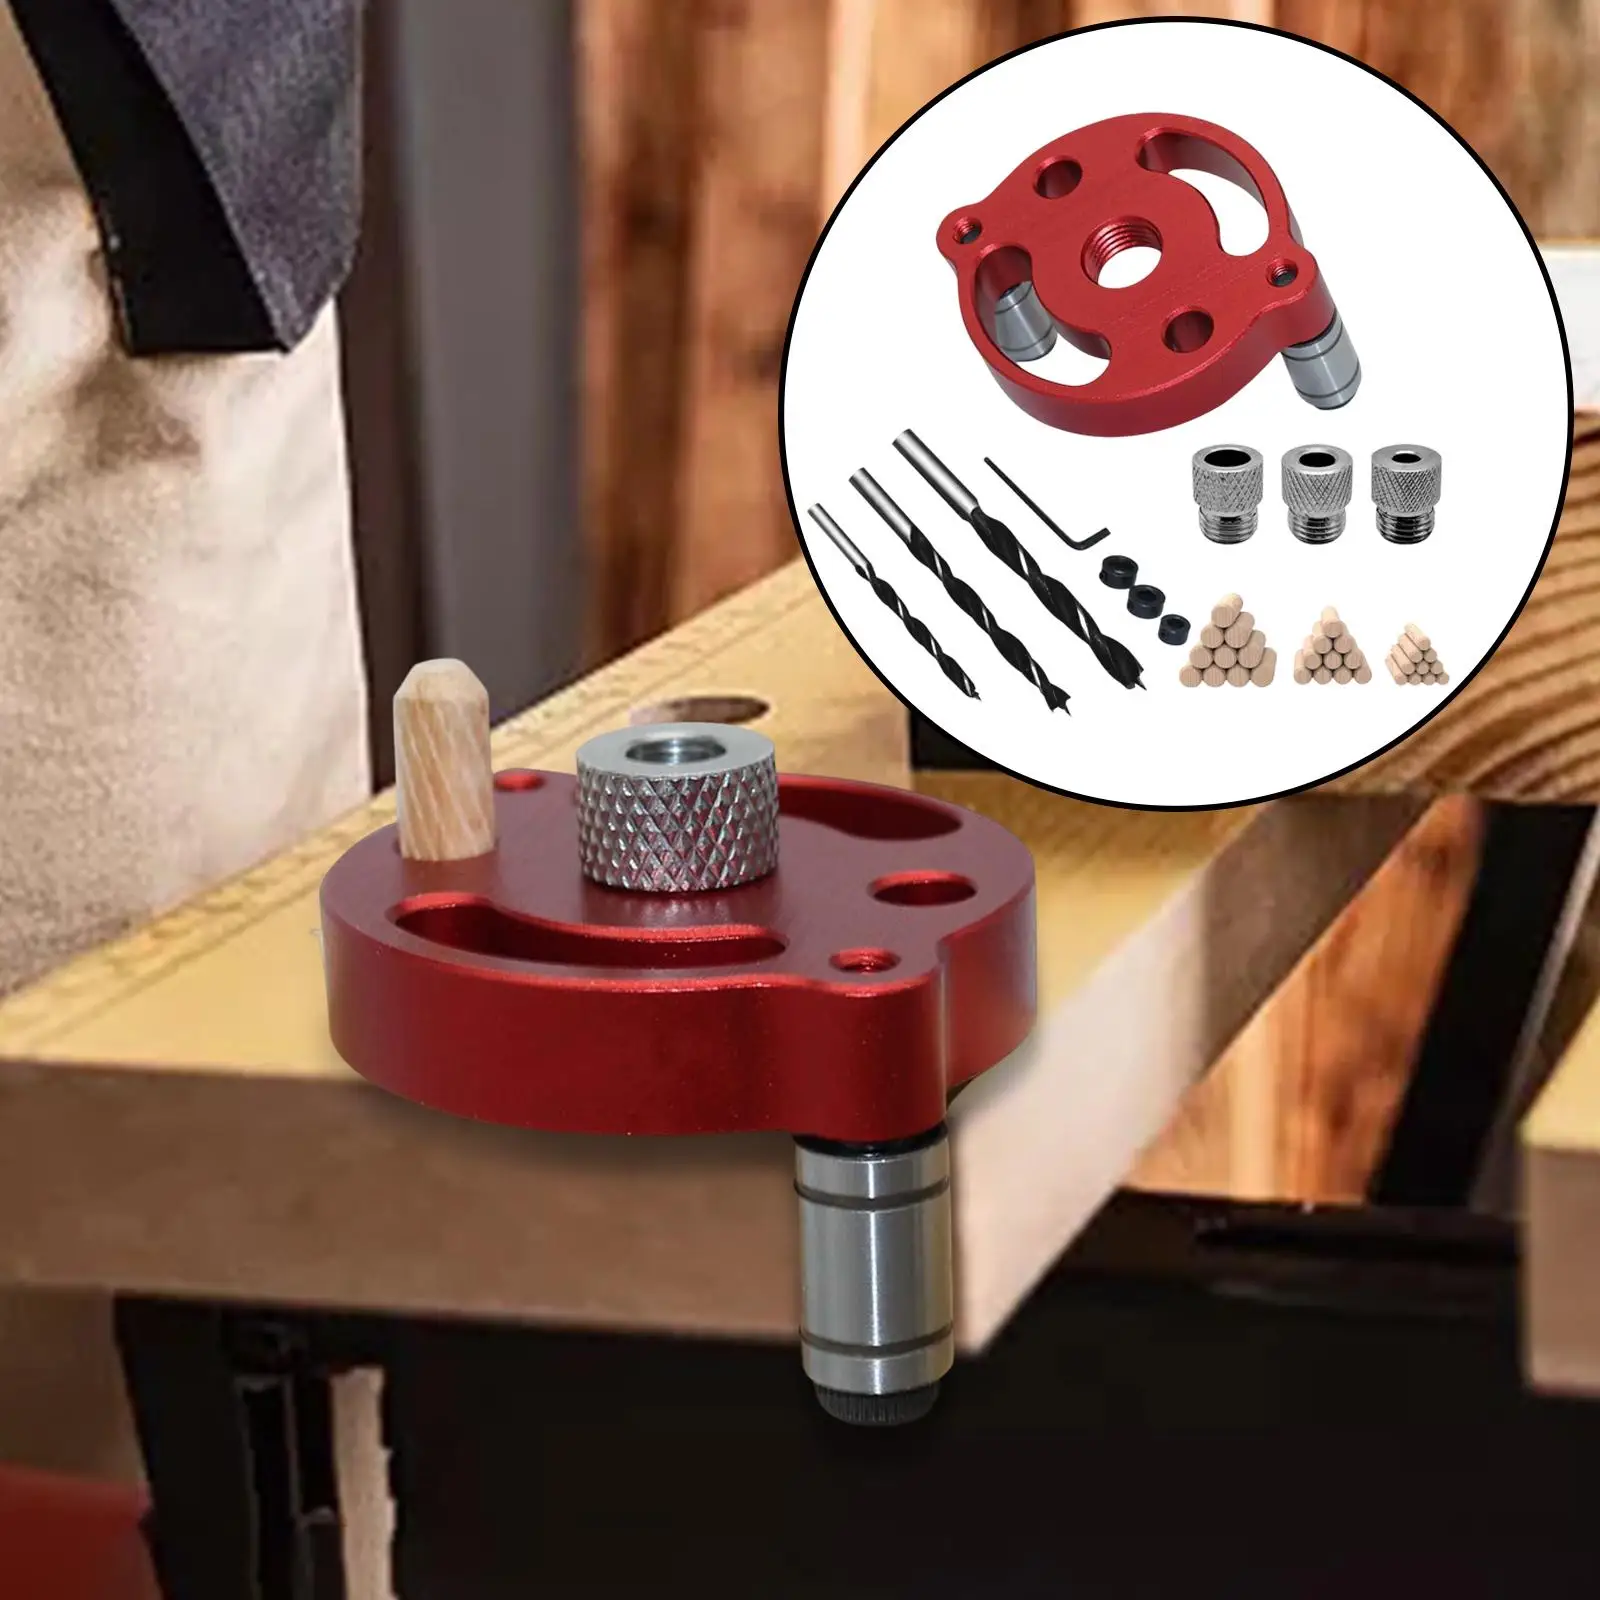 Vertical Self Centering Dowel Jig Kit Hole Jig Locator Drill Bit Hole Puncher for Woodworking Tools Craft Carpenters